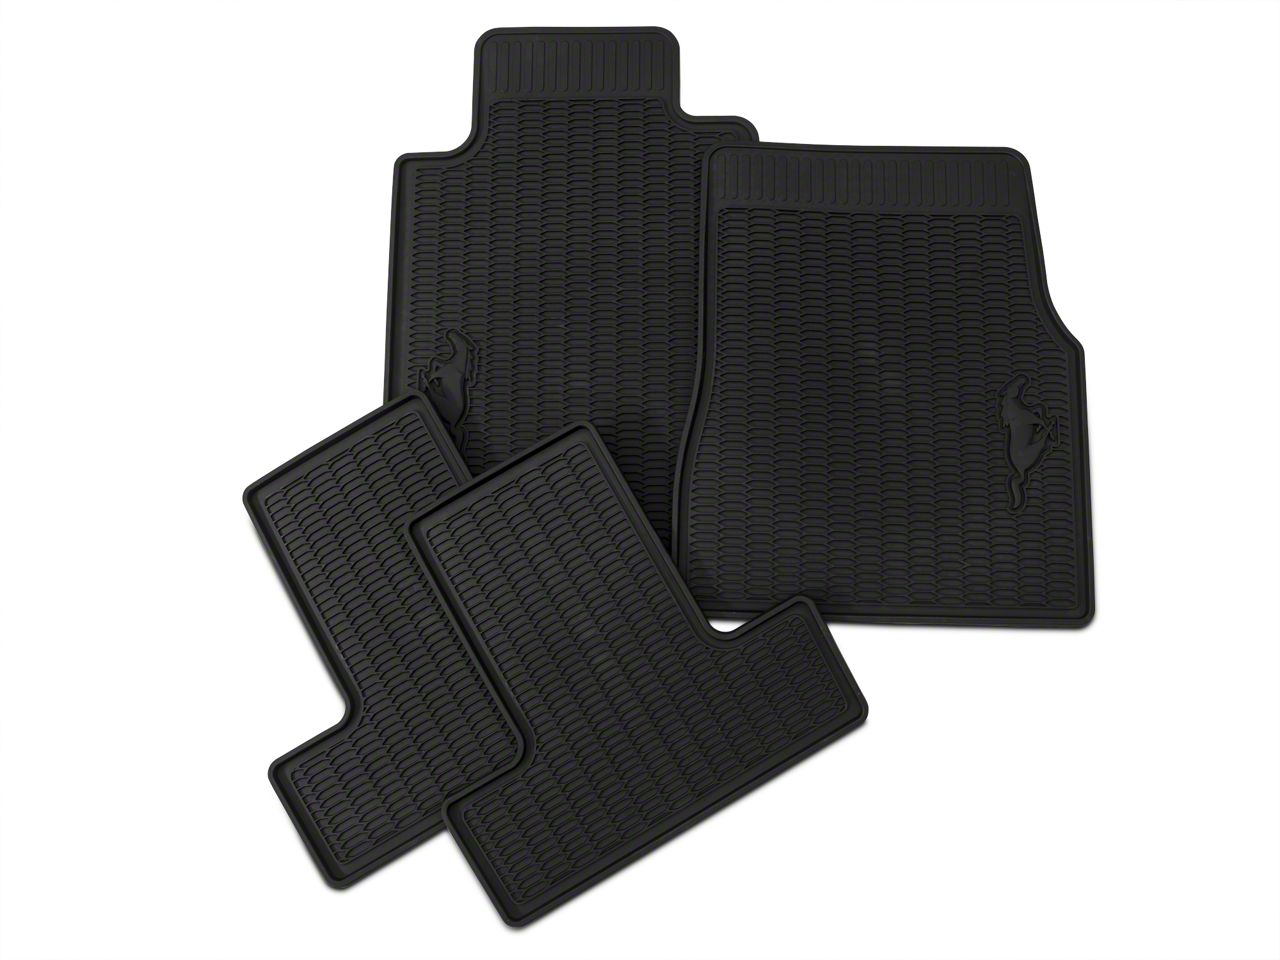 Ford mustang all weather floor mats w/ pony logo #5